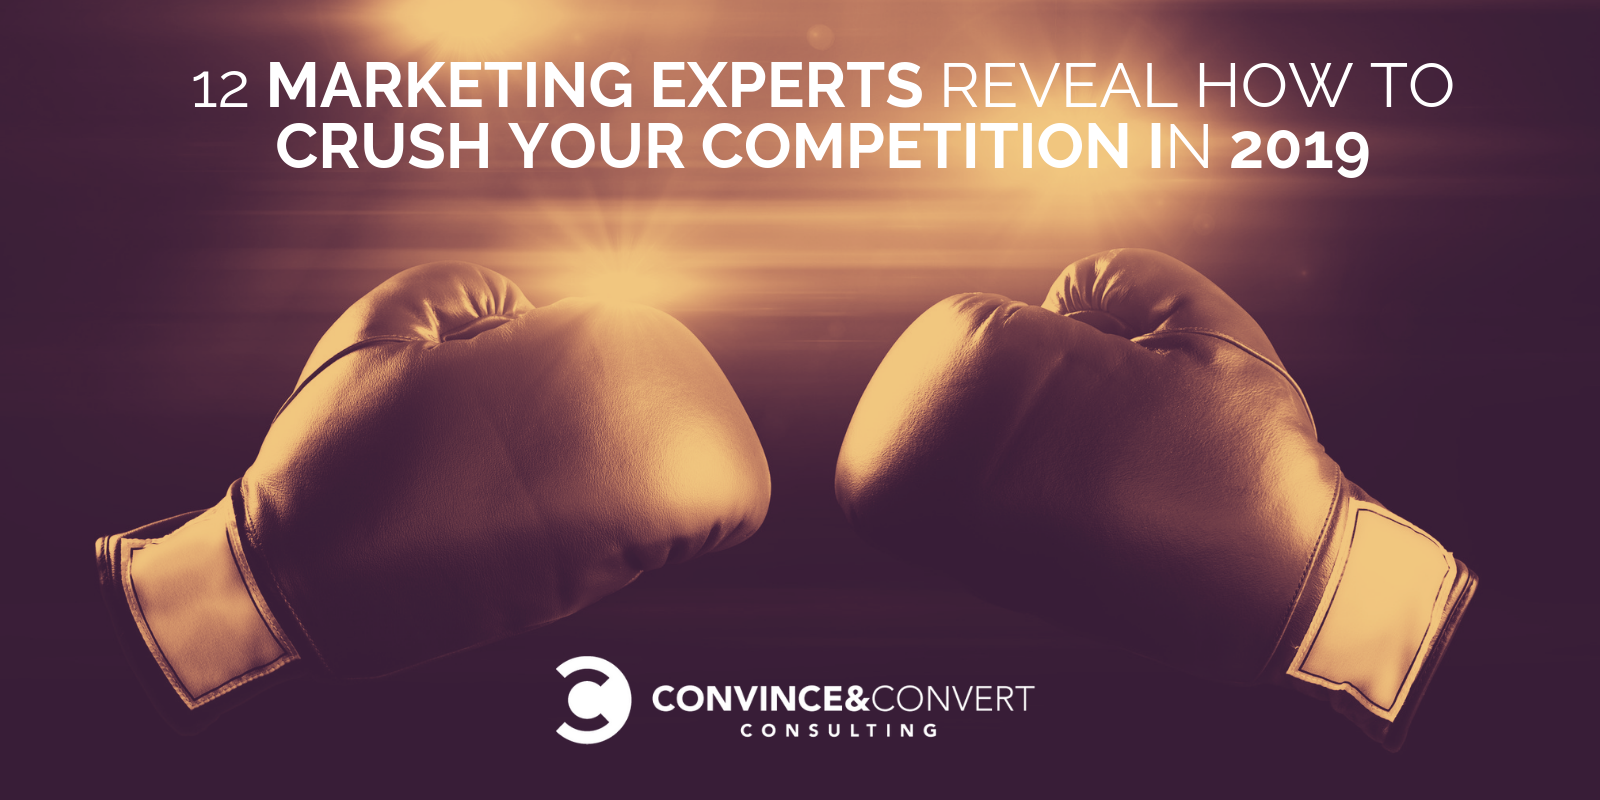 12 Marketing Experts Reveal How to Crush Your Competition in 2019